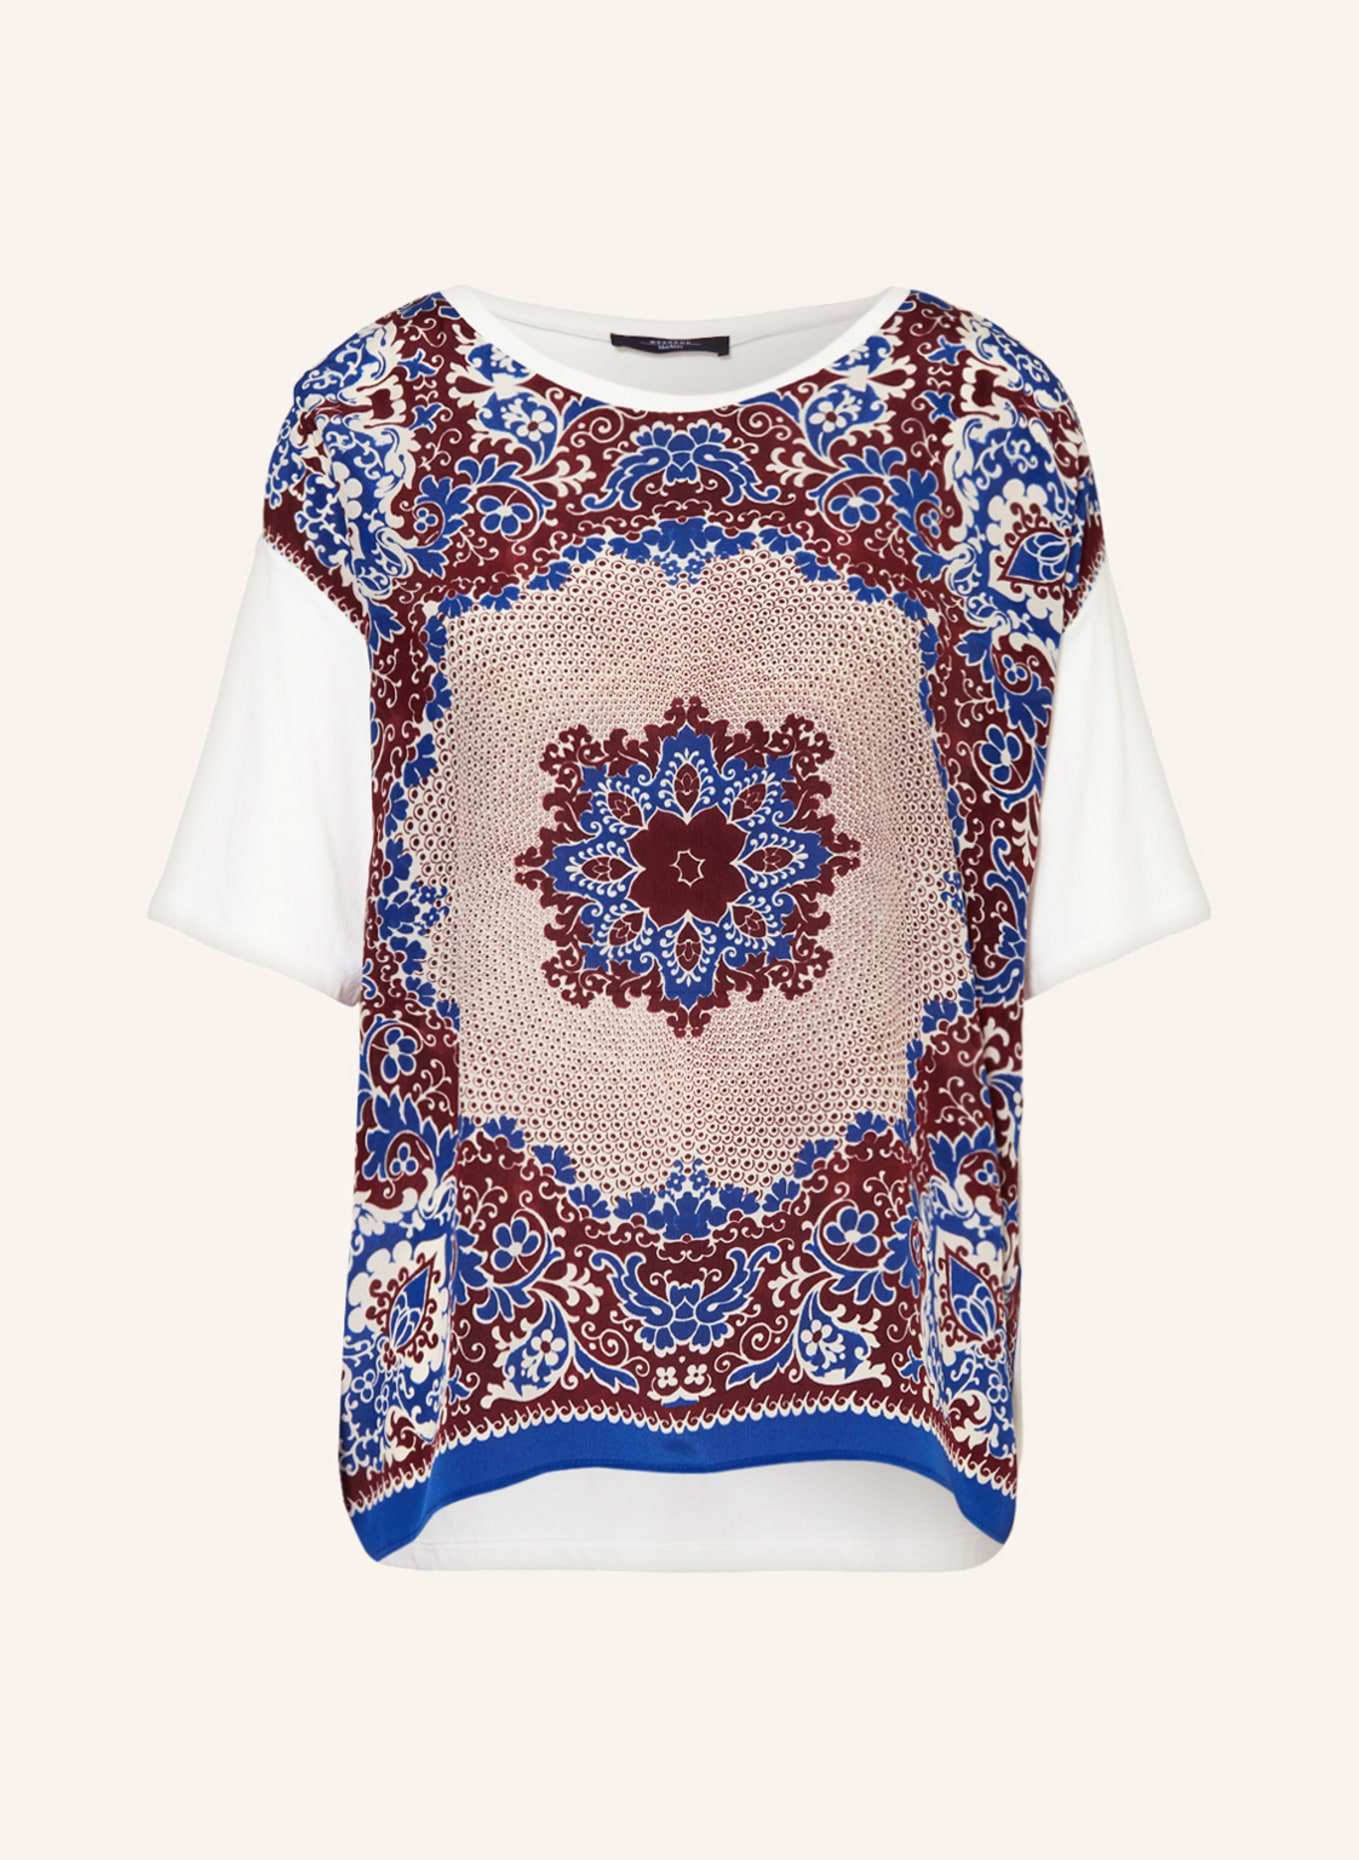 WEEKEND MaxMara T-shirt in mixed materials, Color: WHITE/ BLUE/ DARK RED (Image 1)